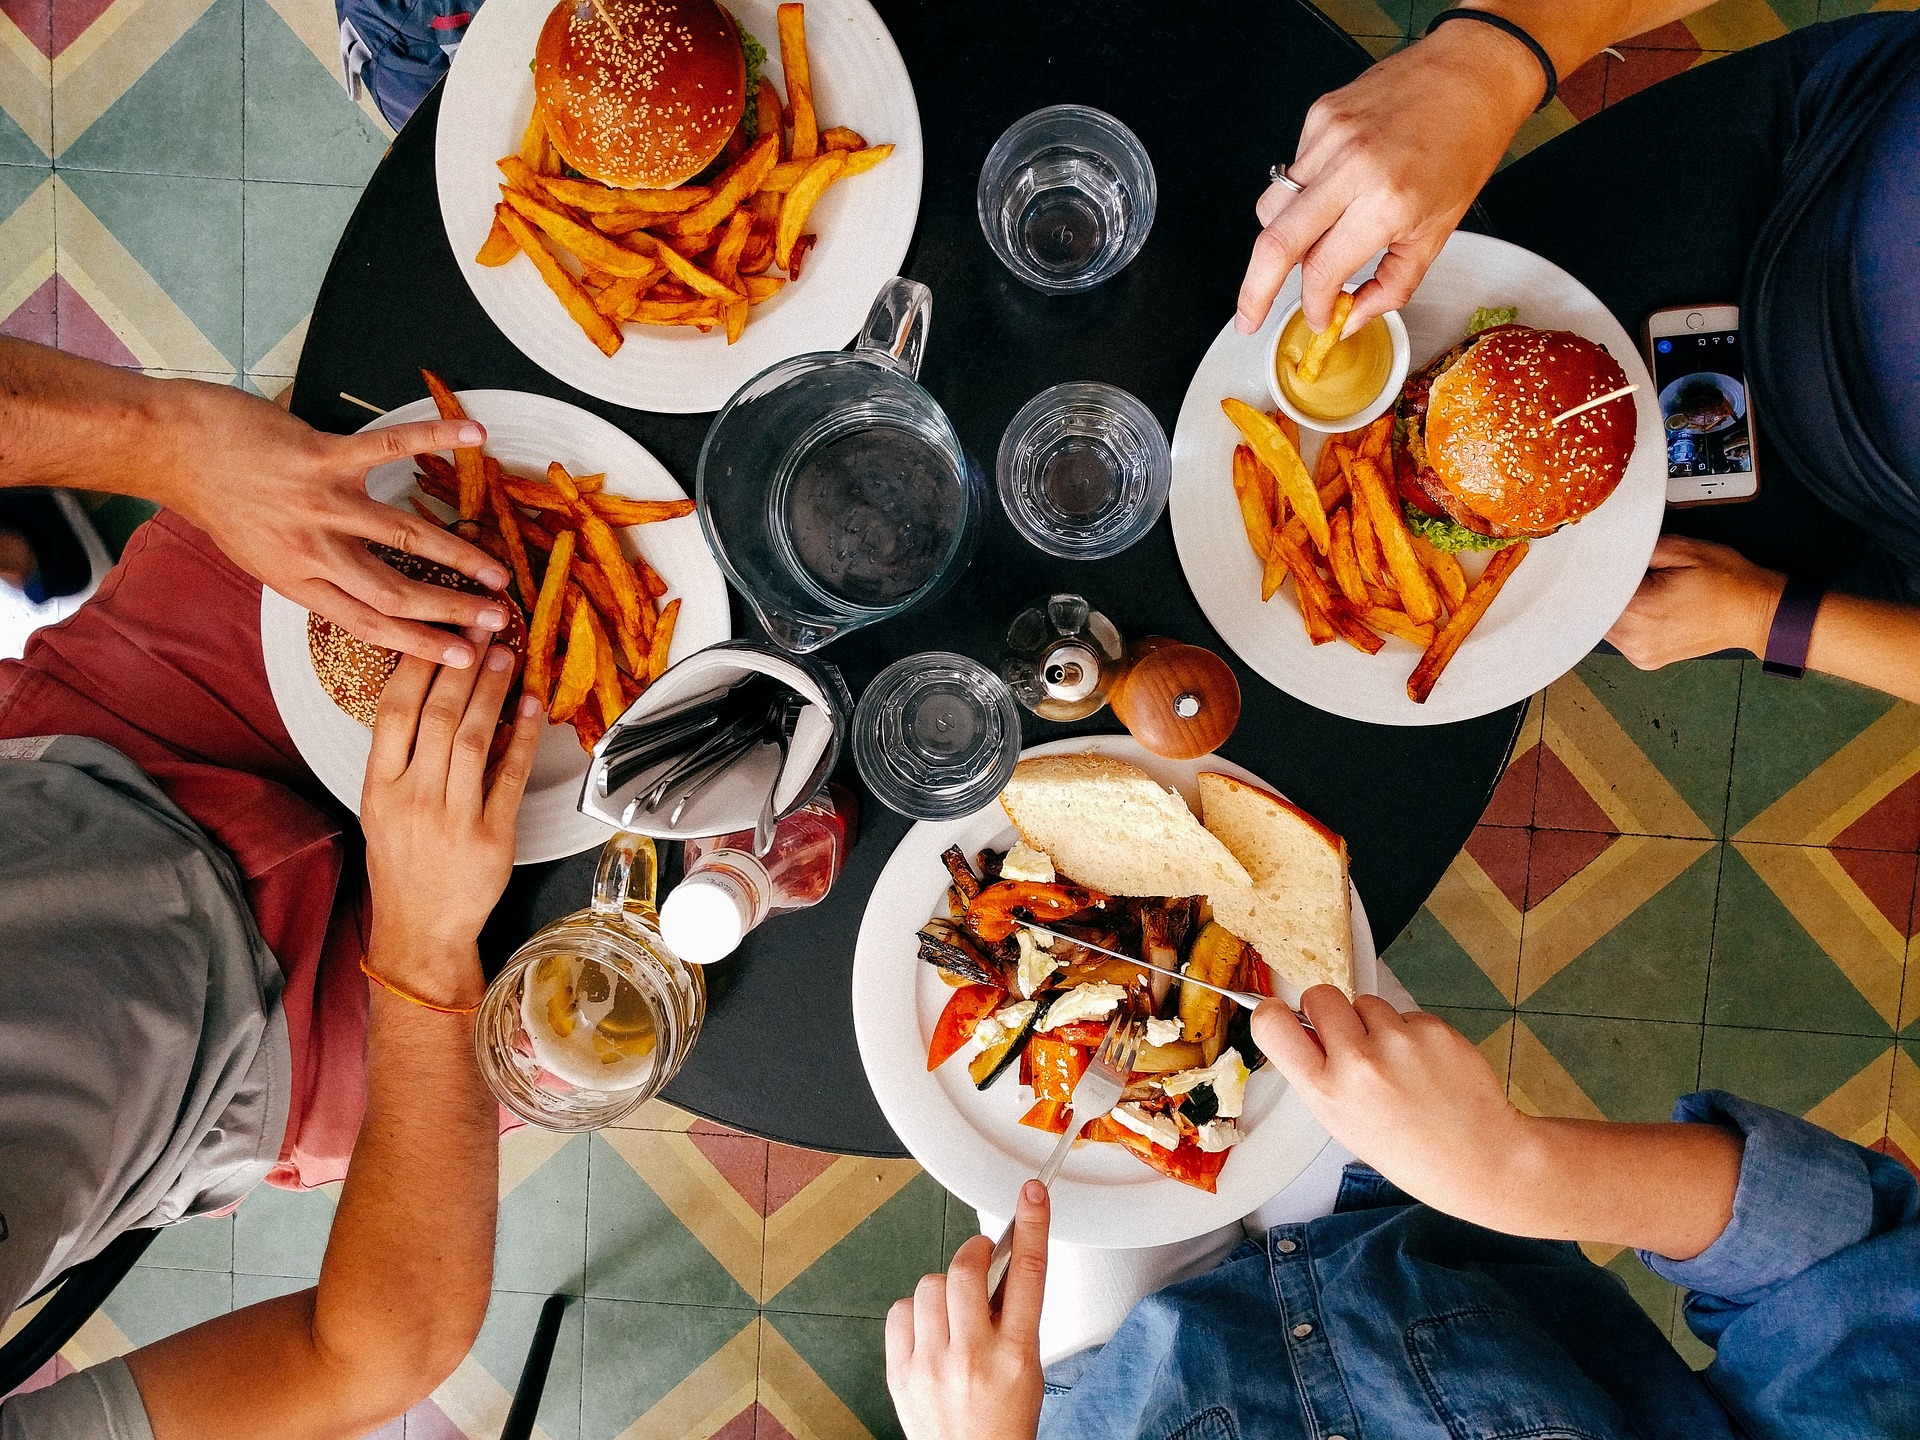 Eating Out Safely with Celiac Disease